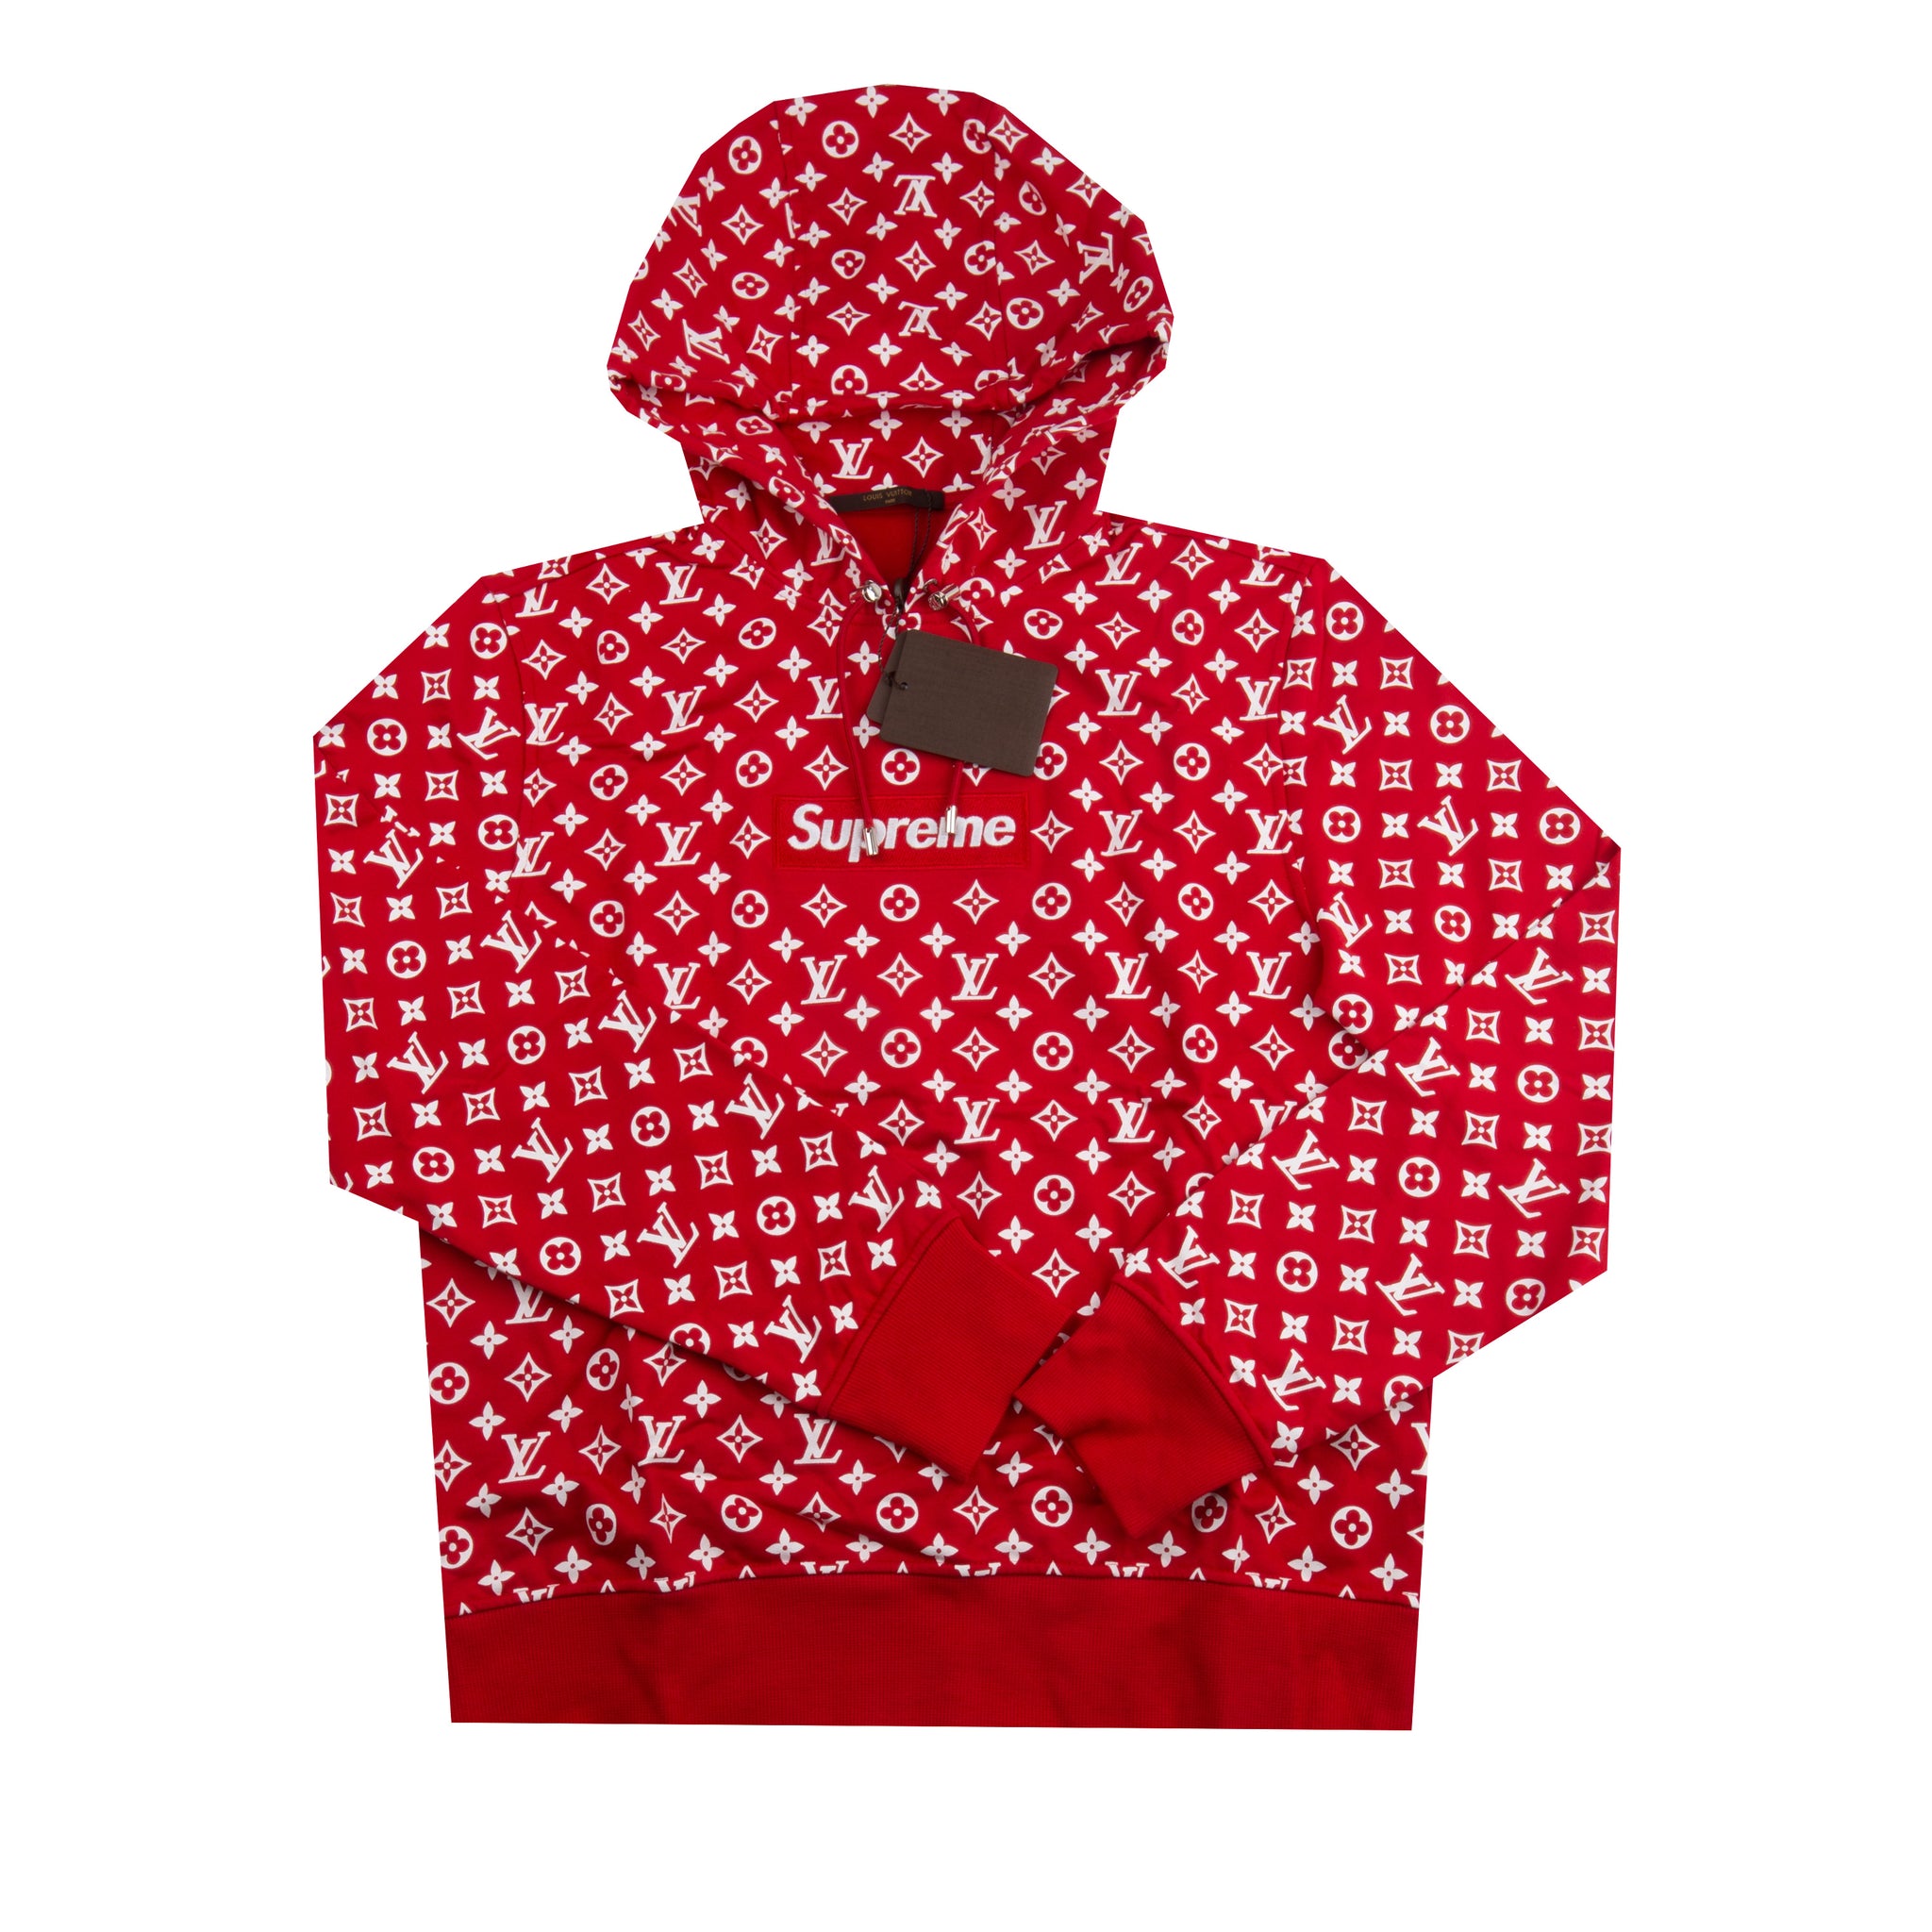 supreme red louis vuitton hoodie